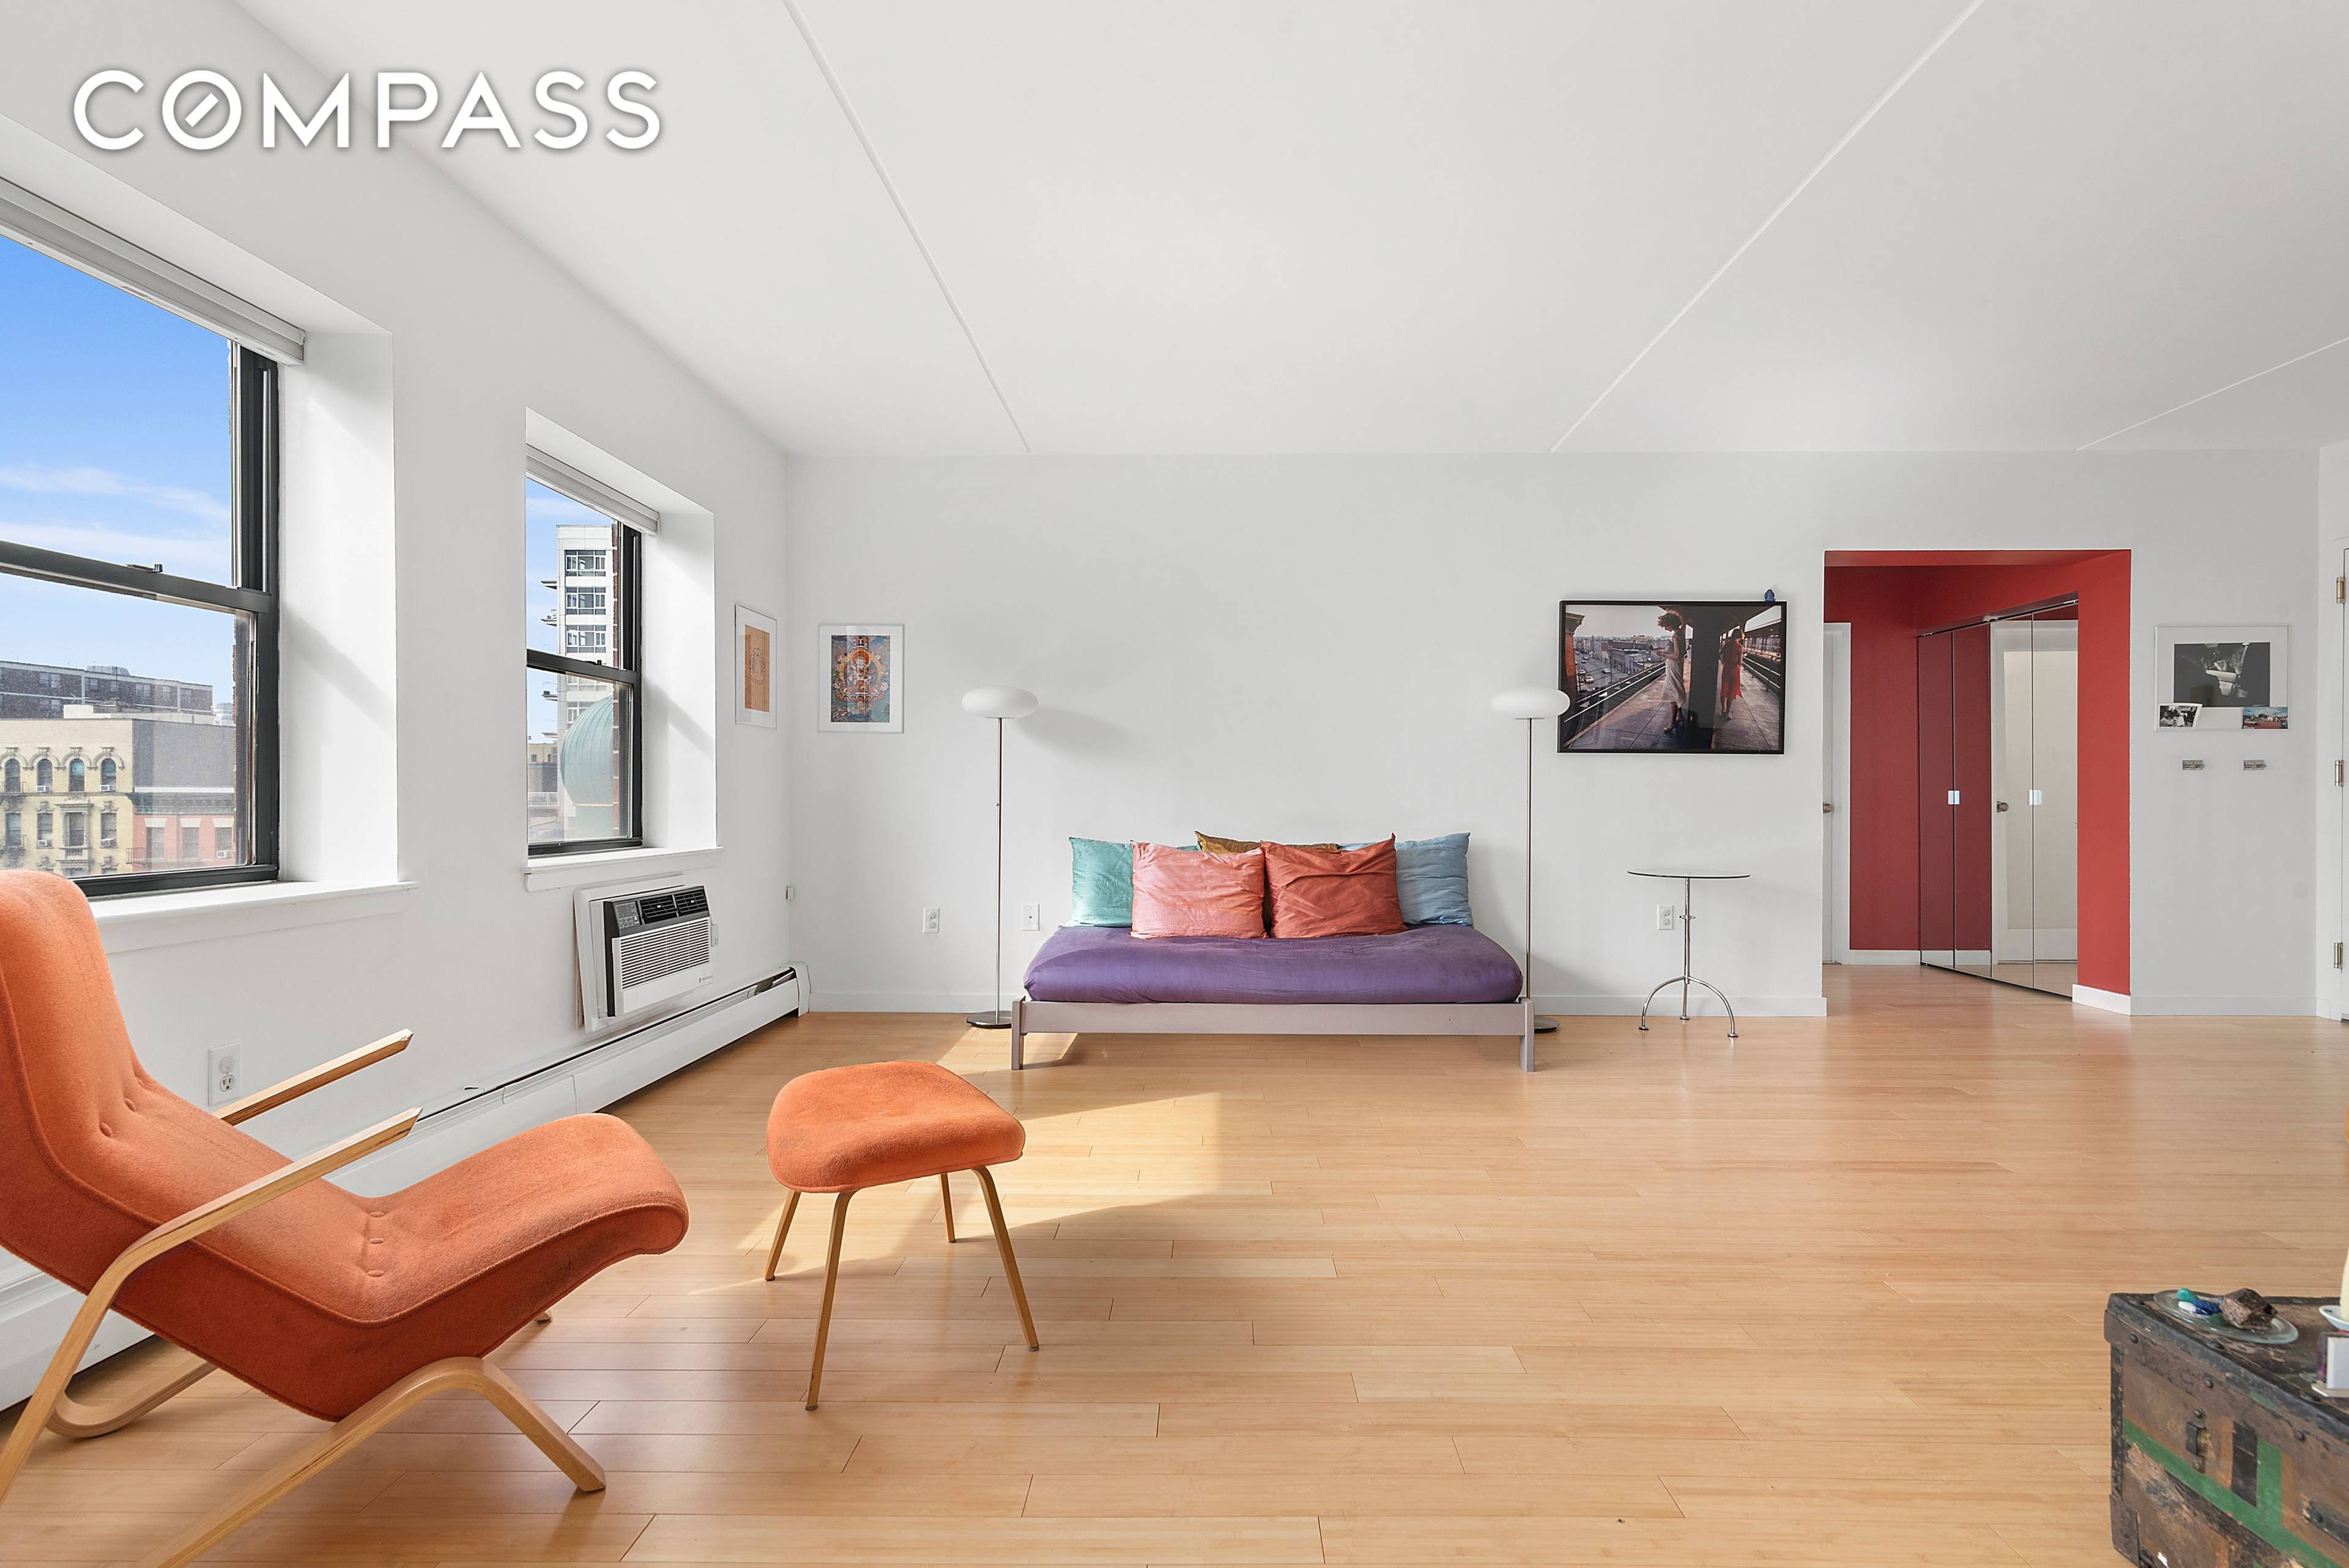 Welcome to this stunning loft like home in the heart of Harlem.